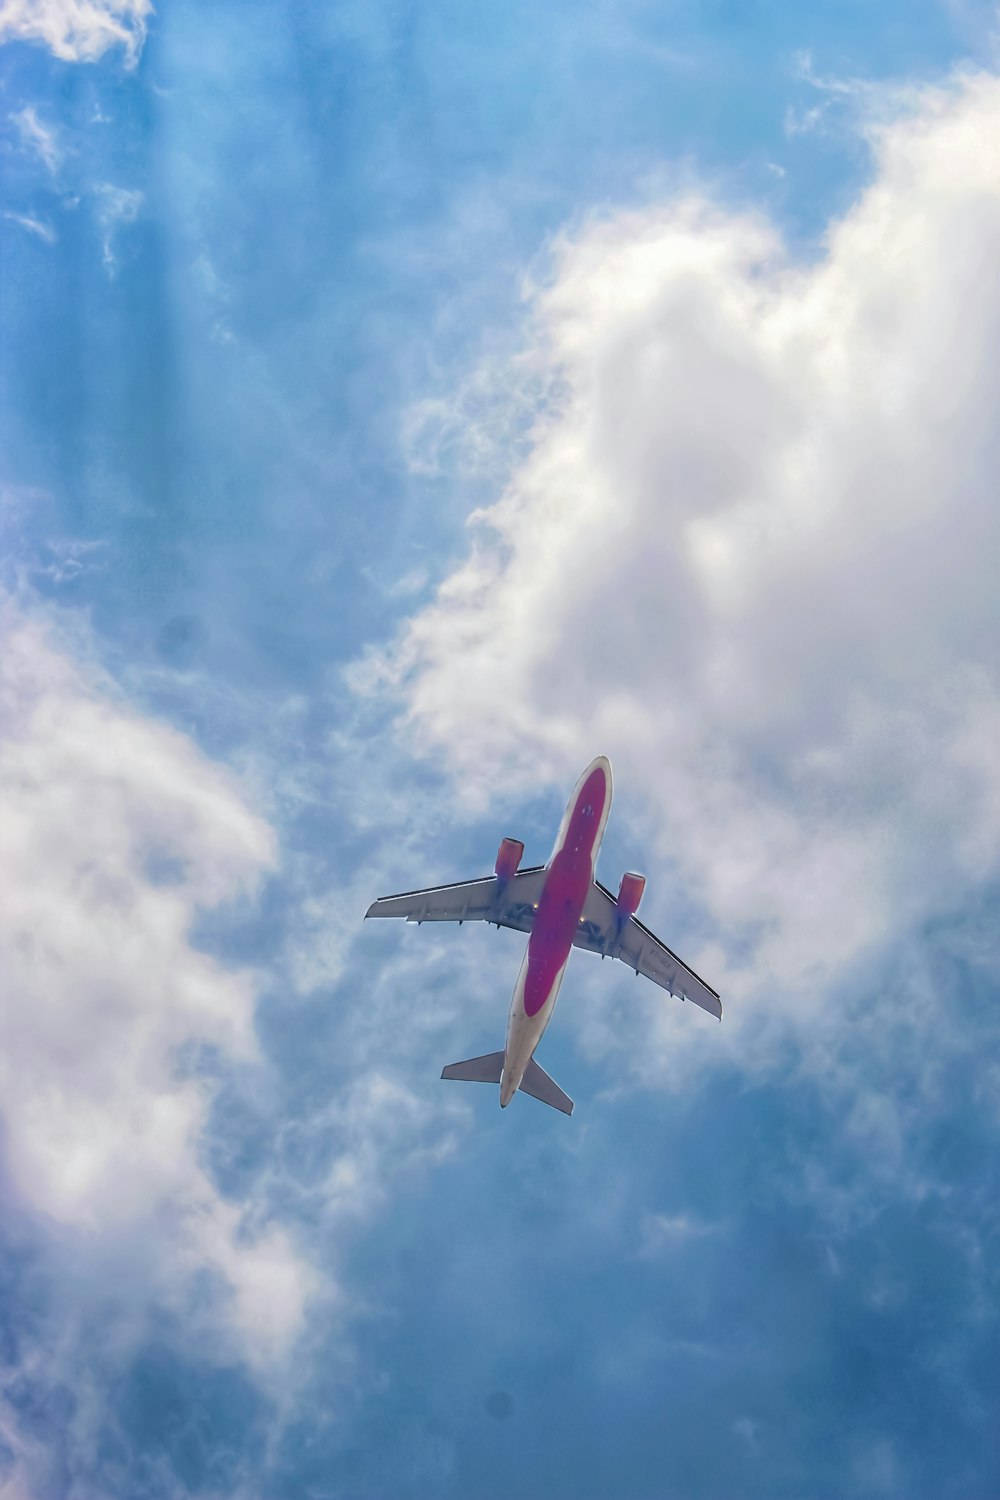 red and white airplane under blue sky and white clouds during daytime